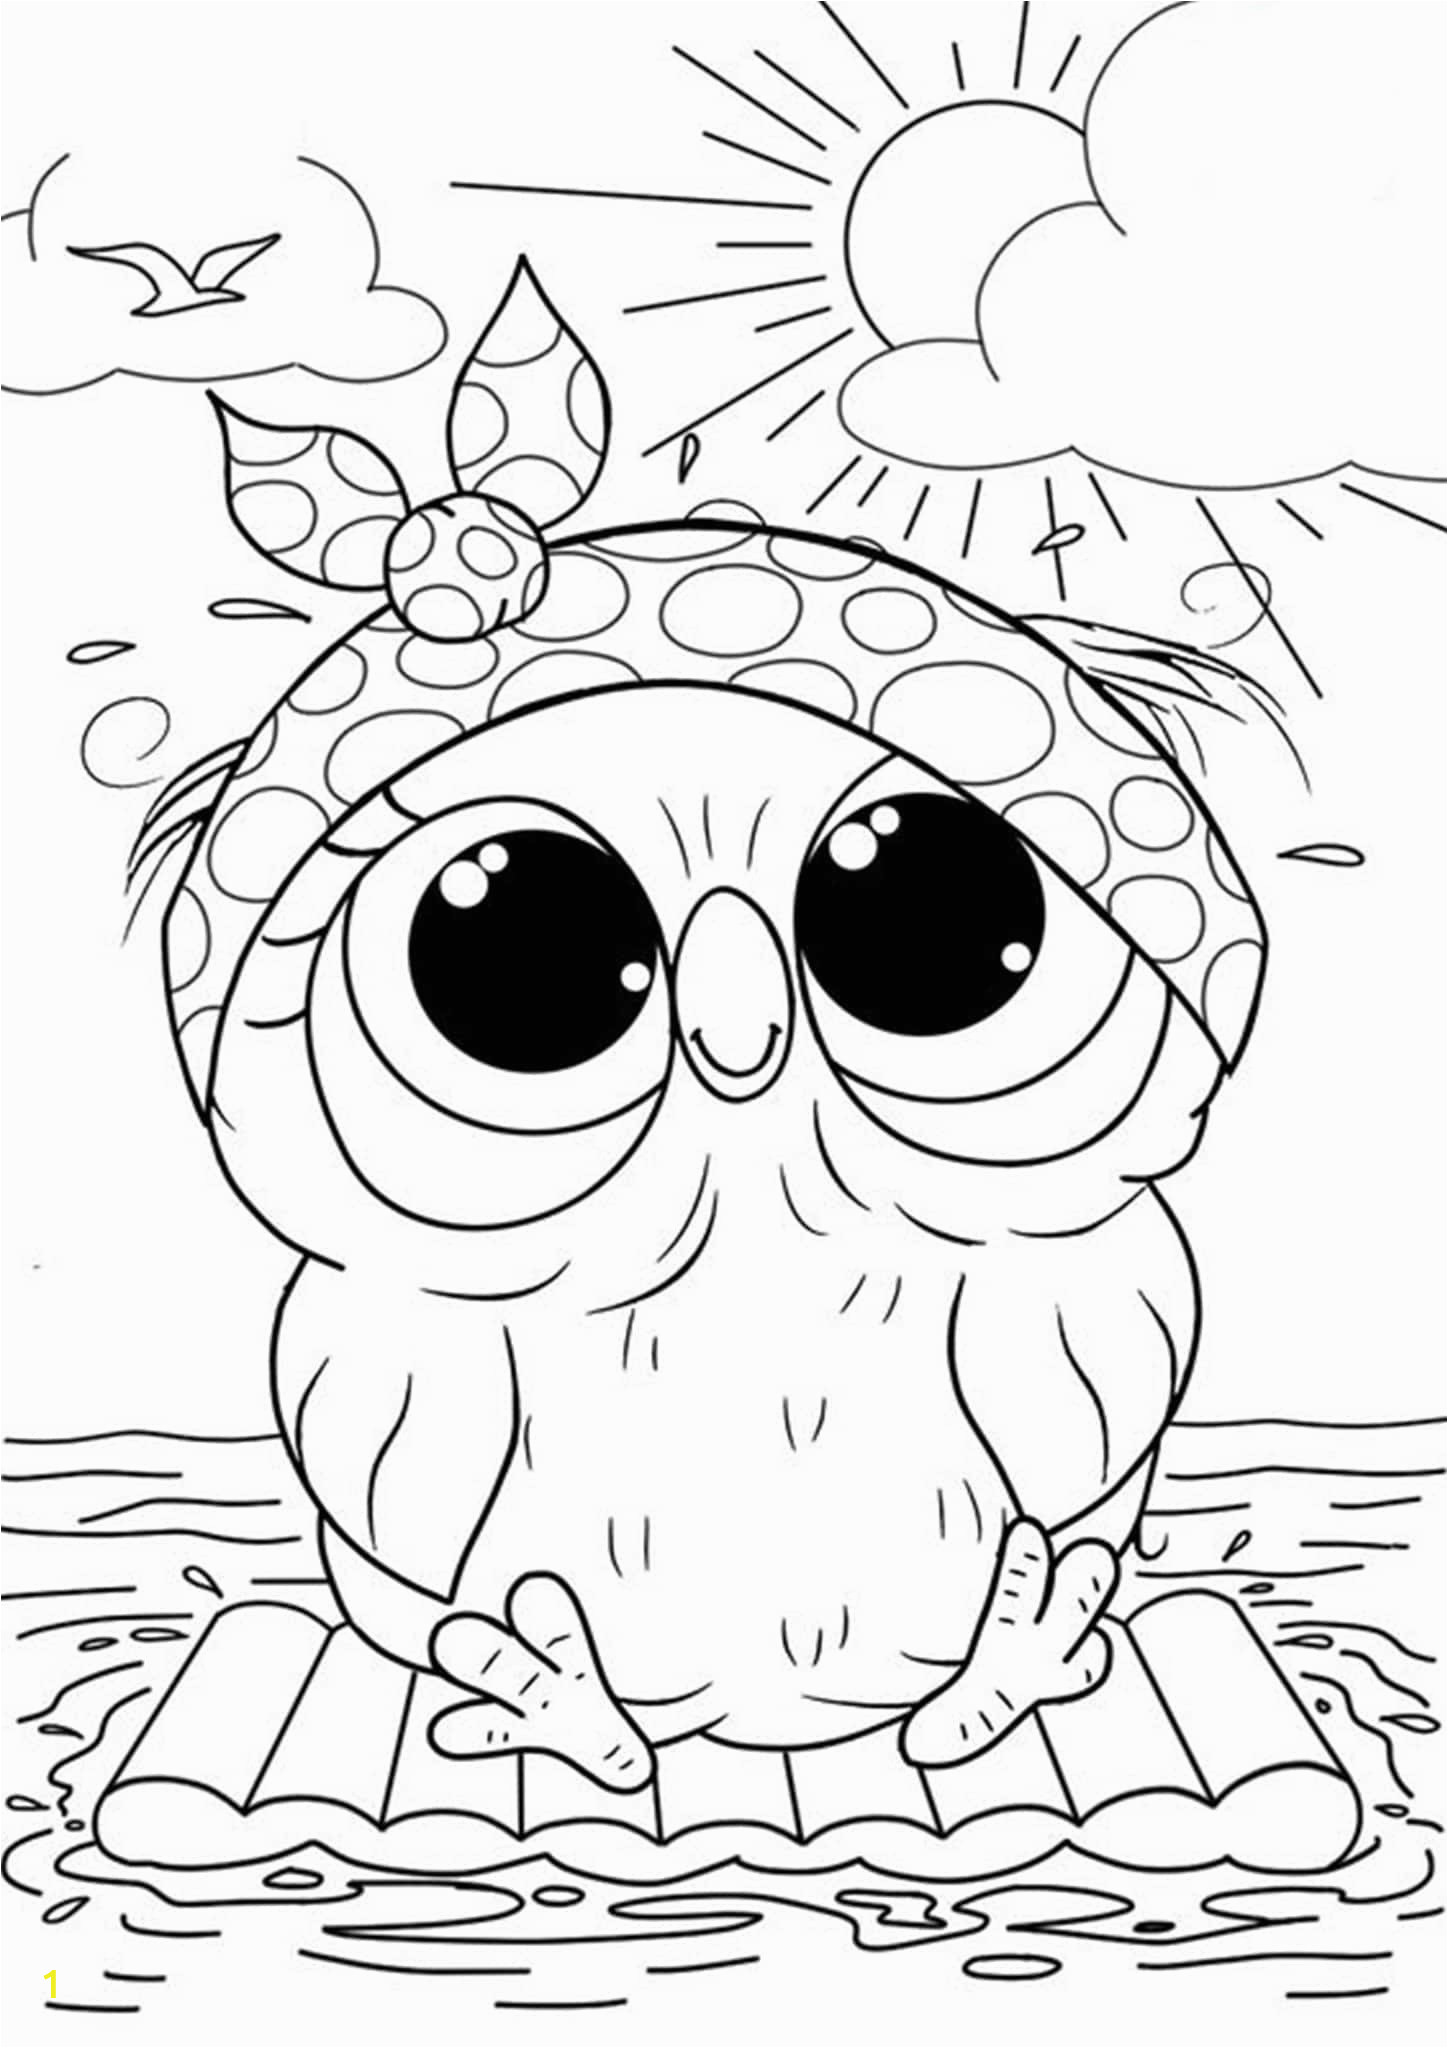 Free Owl Coloring Pages to Print Free & Easy to Print Owl Coloring Pages Tulamama